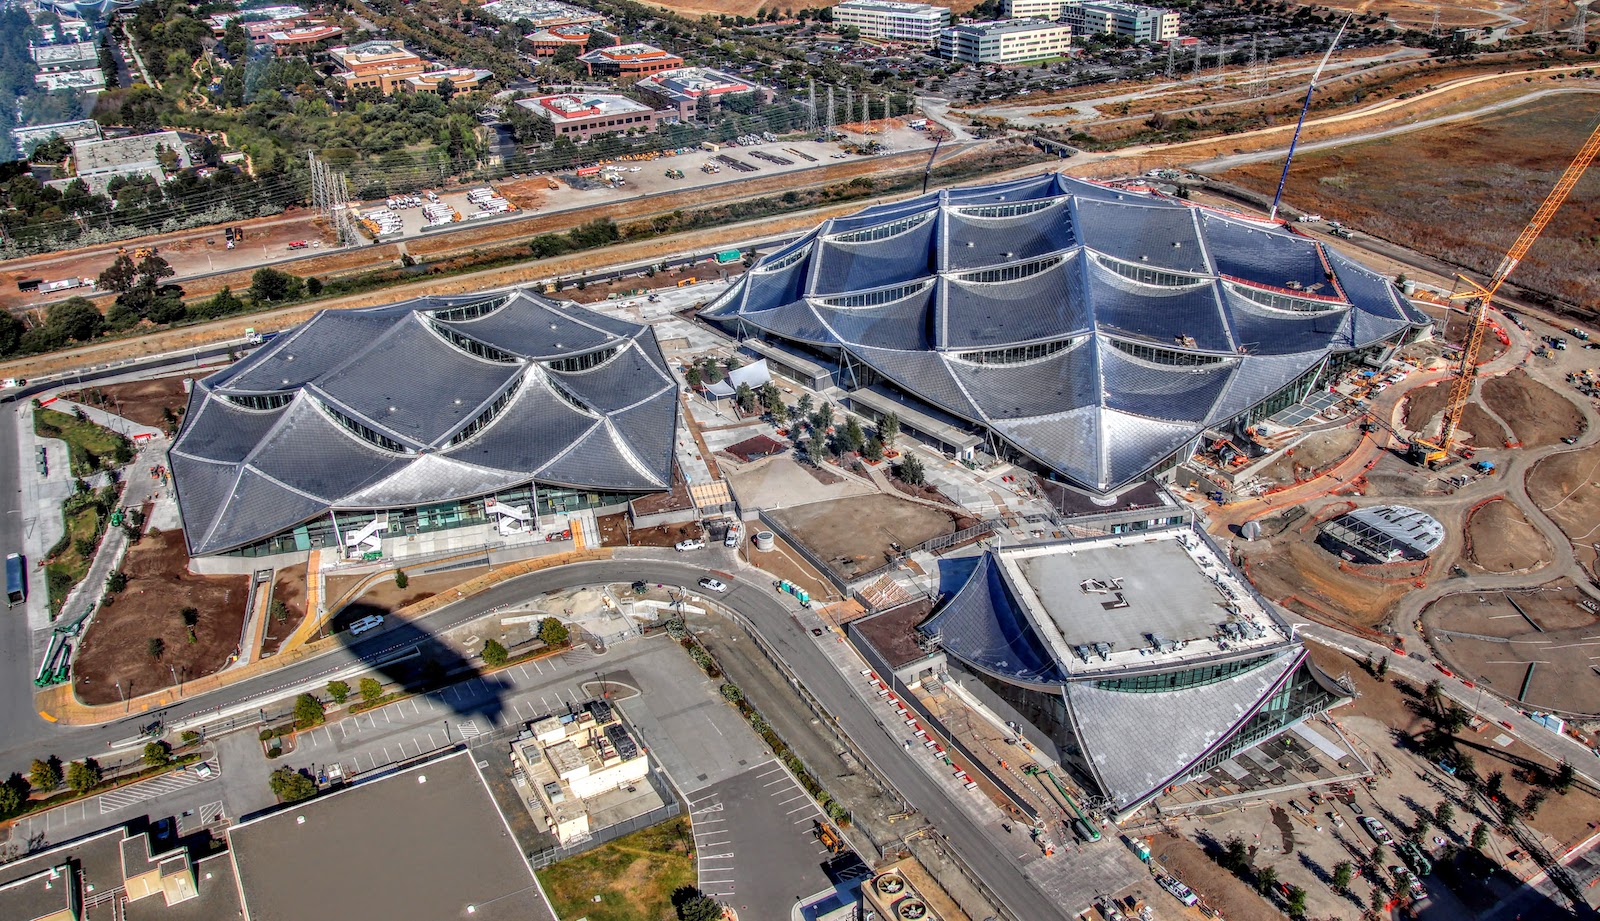 two large buildings with scale-like roofs with multiple, curved peaks as seen from above